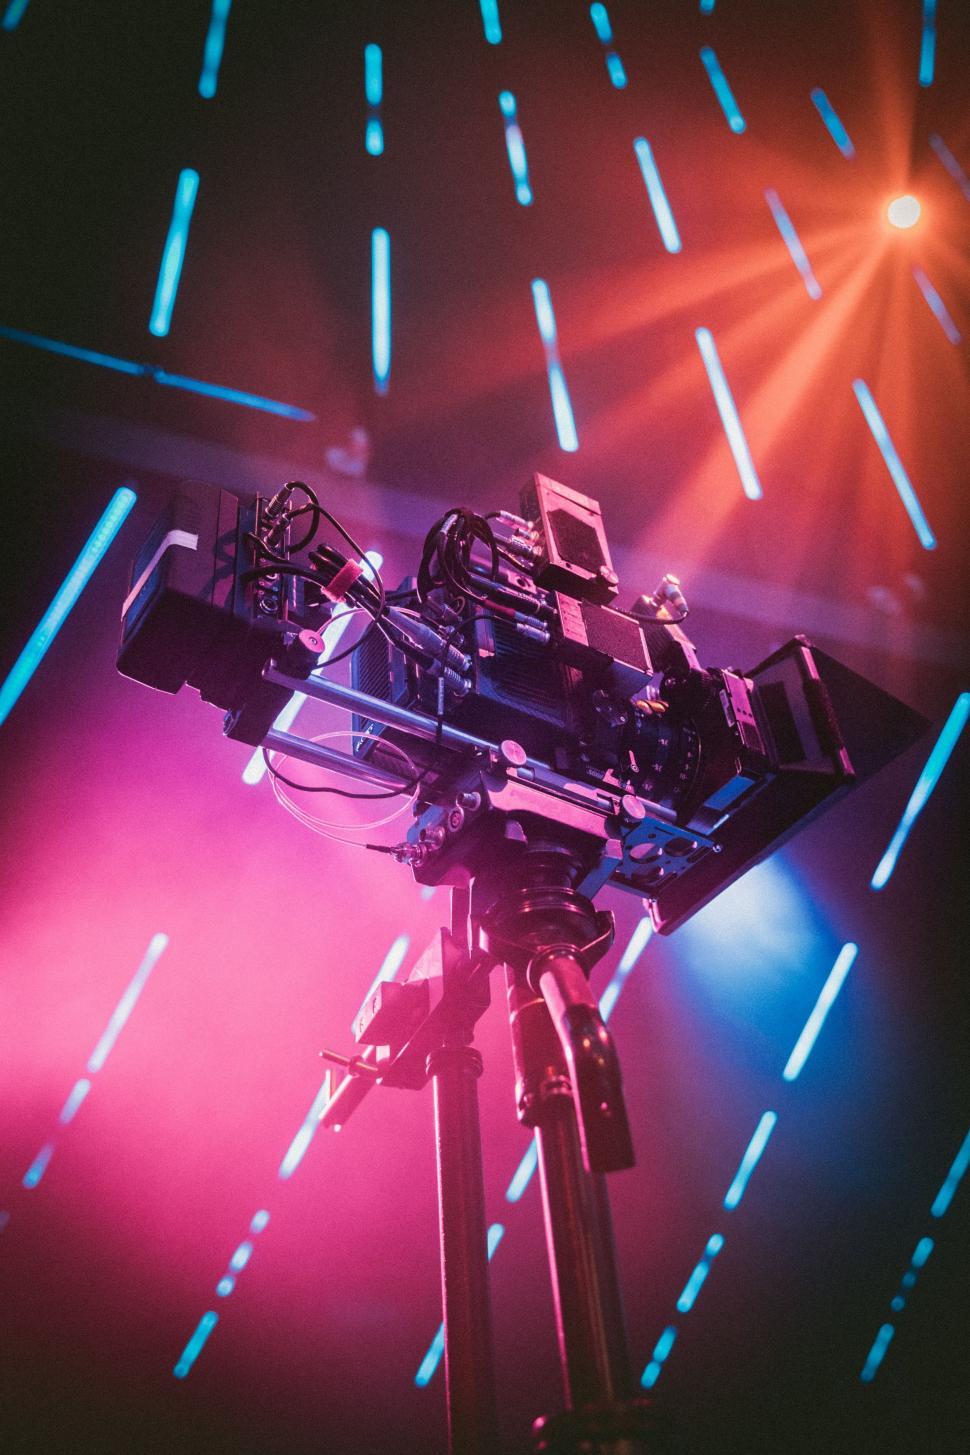 Free Image of Camera on Tripod in Front of Bright Lights 